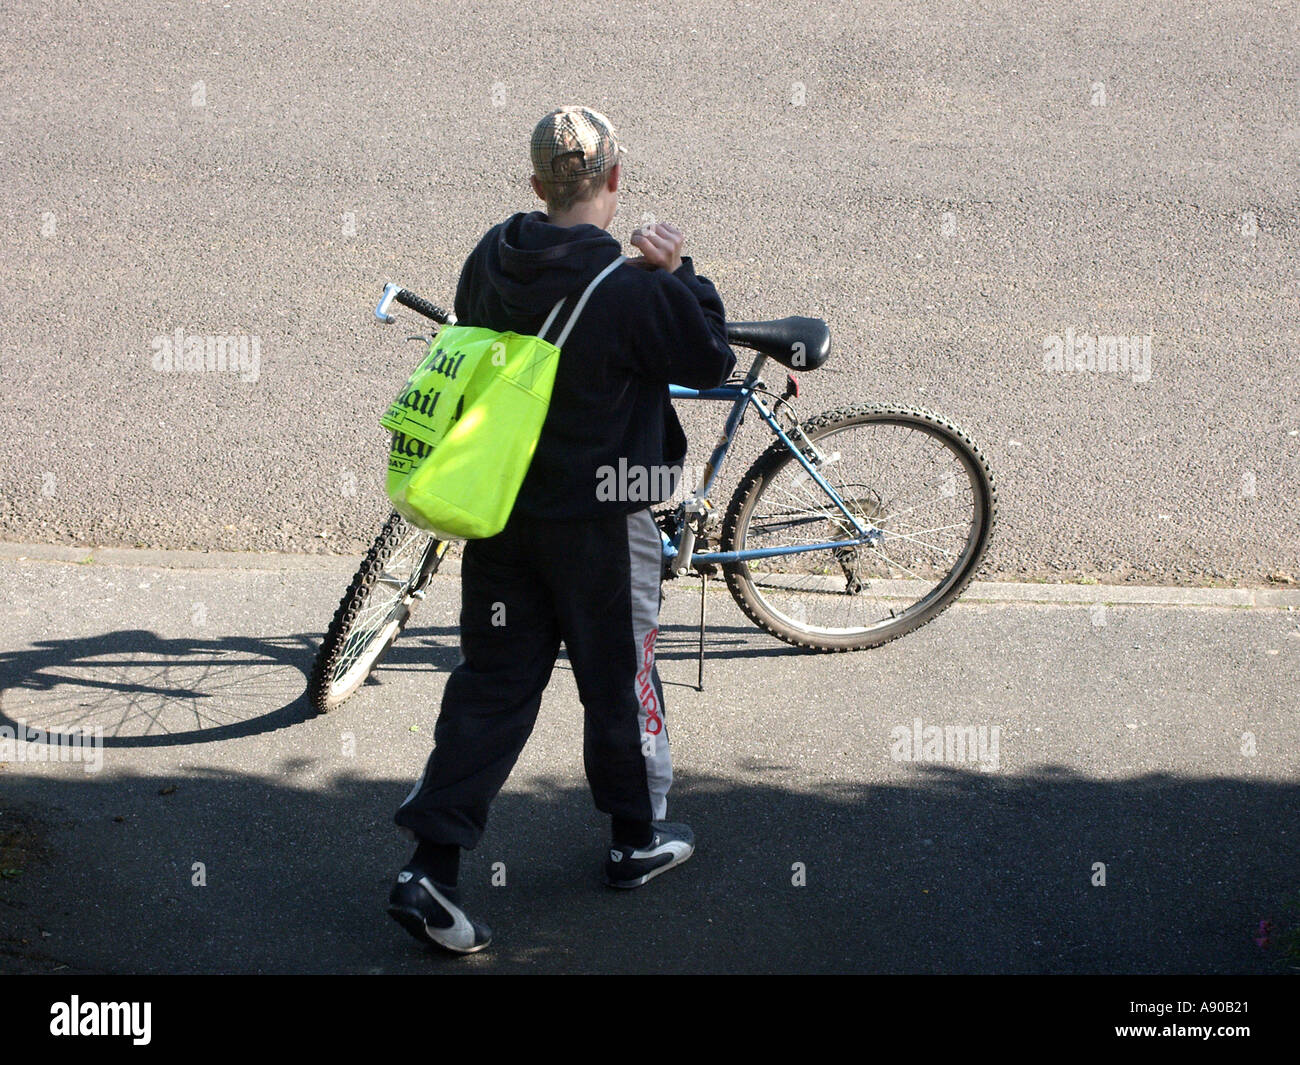 Newspaper delivery paper boy back view returning to bike to continue round after delivering to front door of residential property Essex England UK Stock Photo